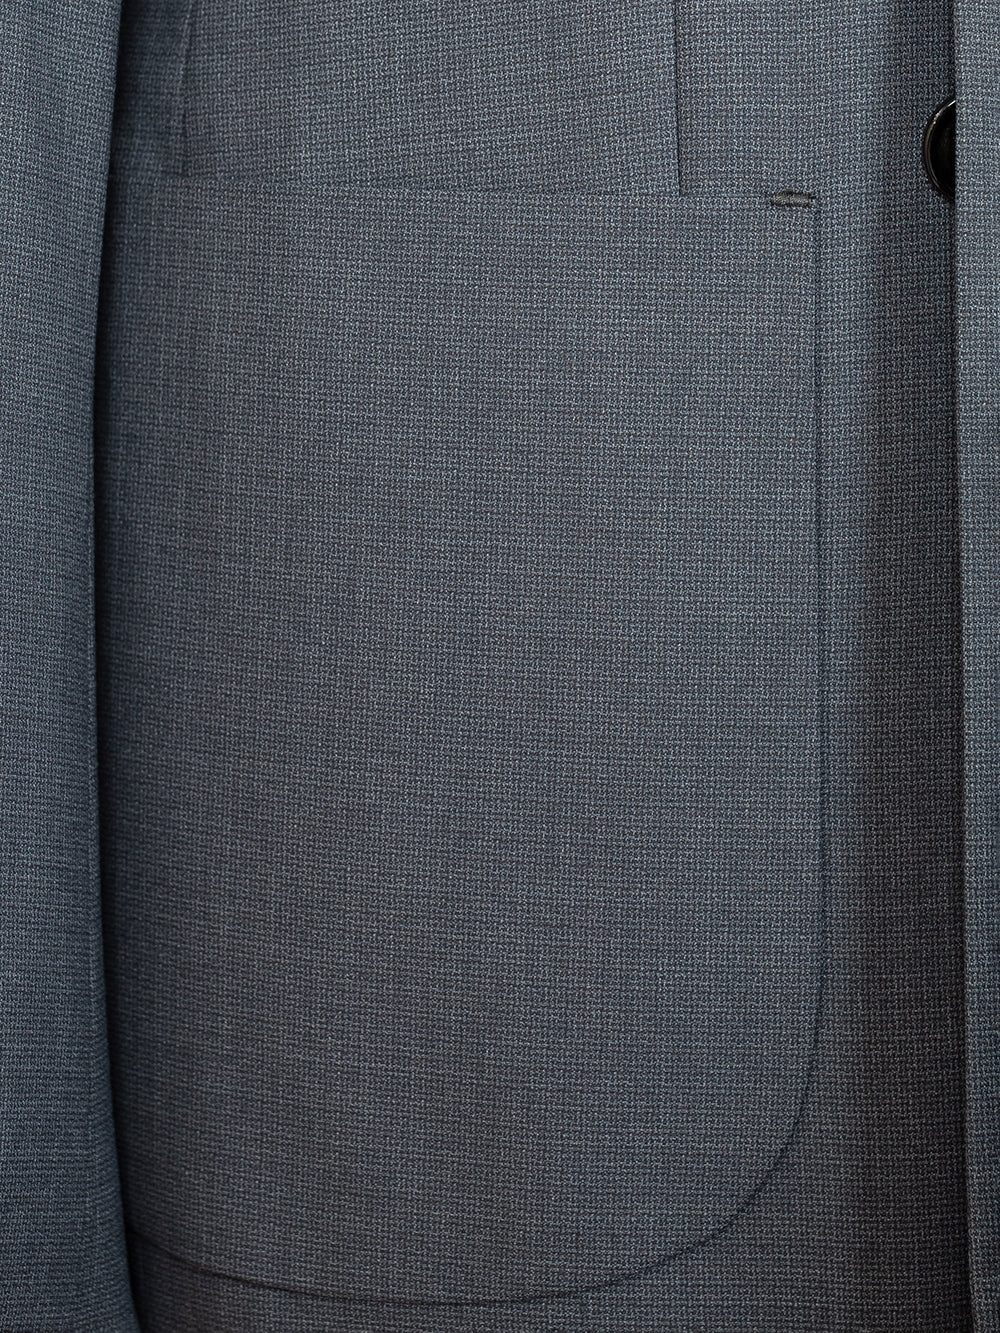 Double Breasted Lava Gray Bespoke Men Suit Tailored